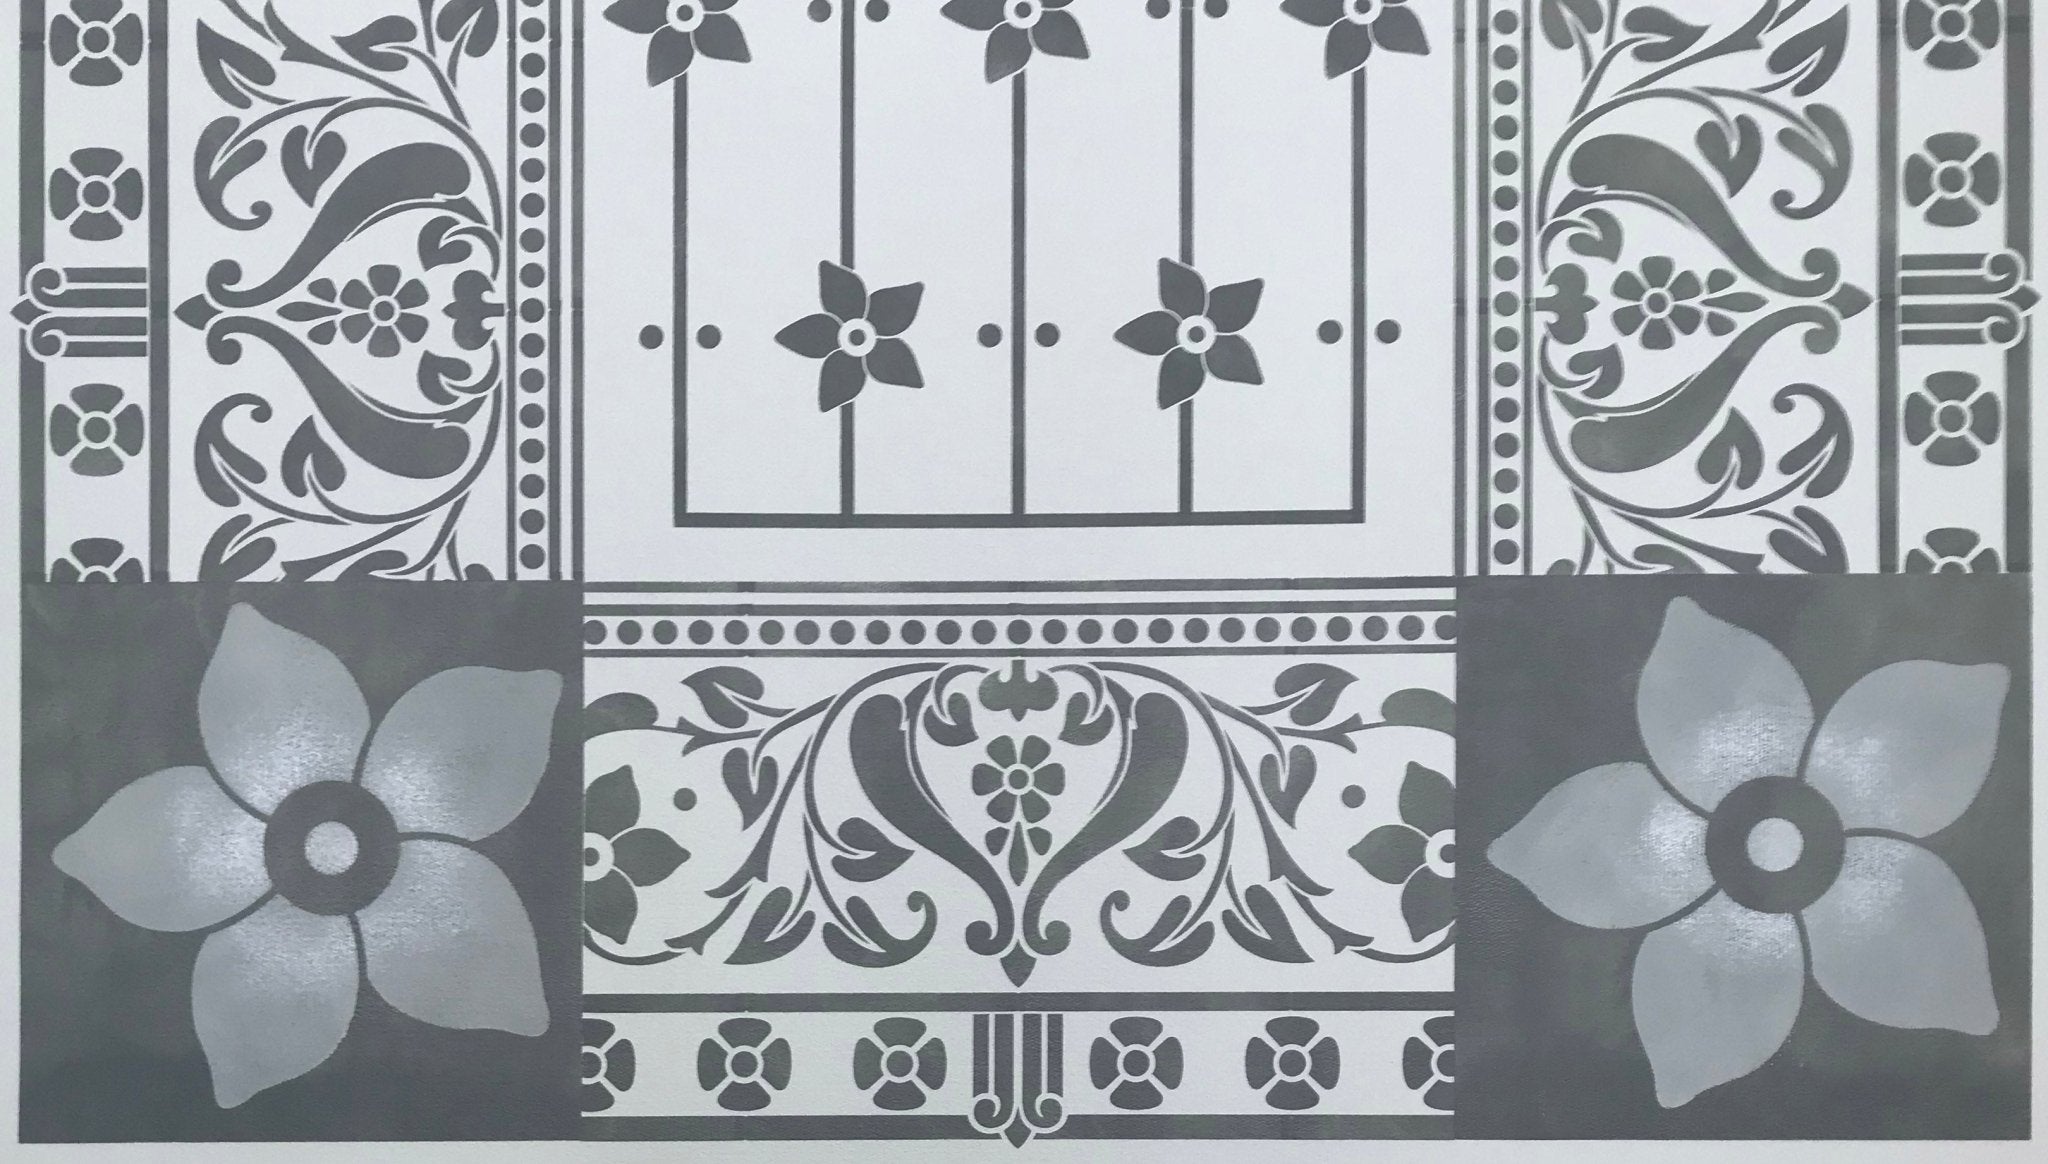 A close up of the corners and border for this floorcloth based on a Dresser design.